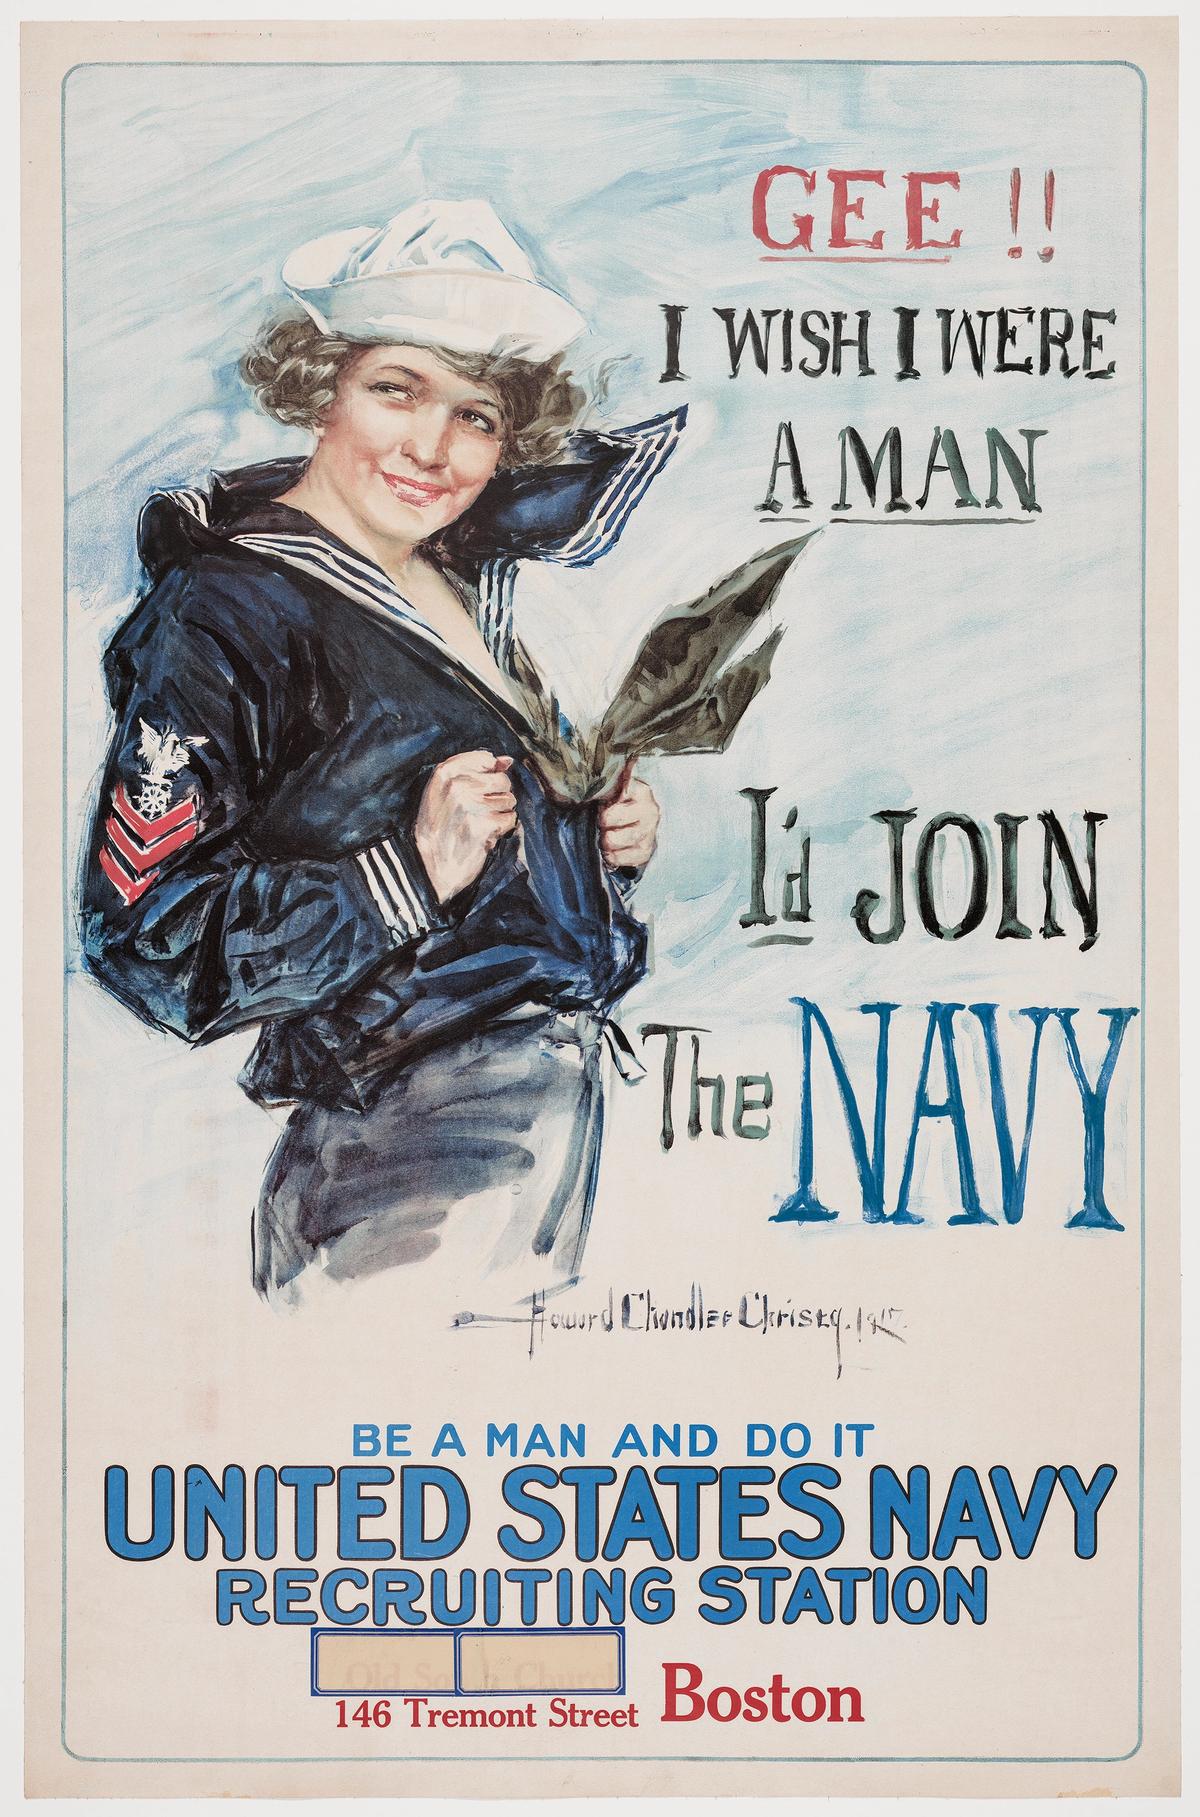 Gee!! I Wish I Were a Man—I'd Join the Navy, a poster by Howard Chandler Christy from around 1917–18, is one of the archival materials on show in the Museum of Fine Art, Boston's Gender Bending Fashion show Photo: © Museum of Fine Arts, Boston